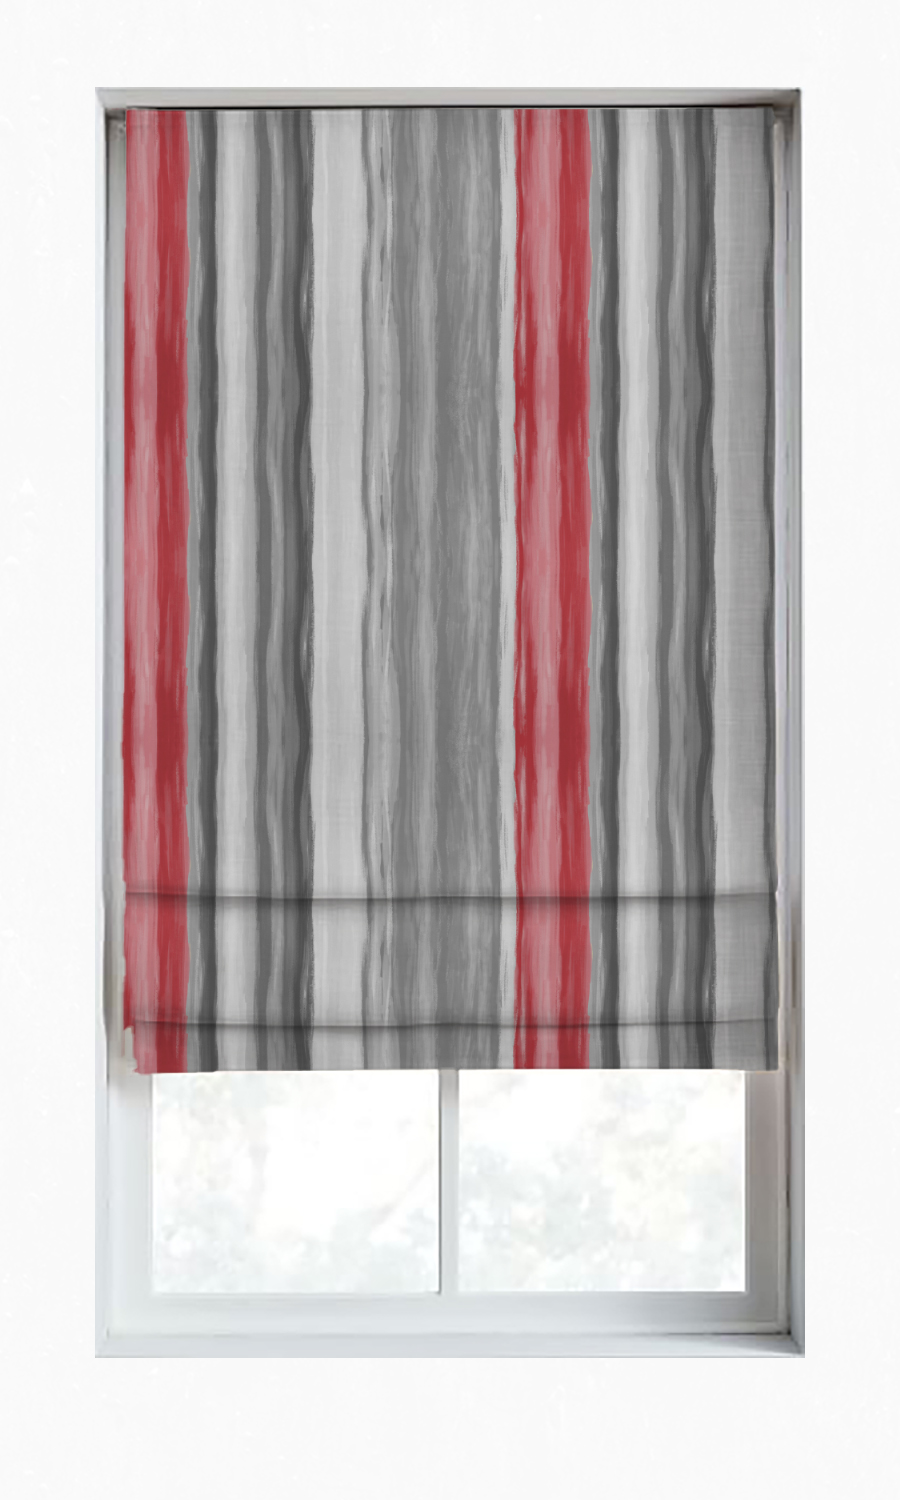 publikum albue innovation 'Sea Holly' Dimout Striped Window Shades (Grey/ Coral Red)